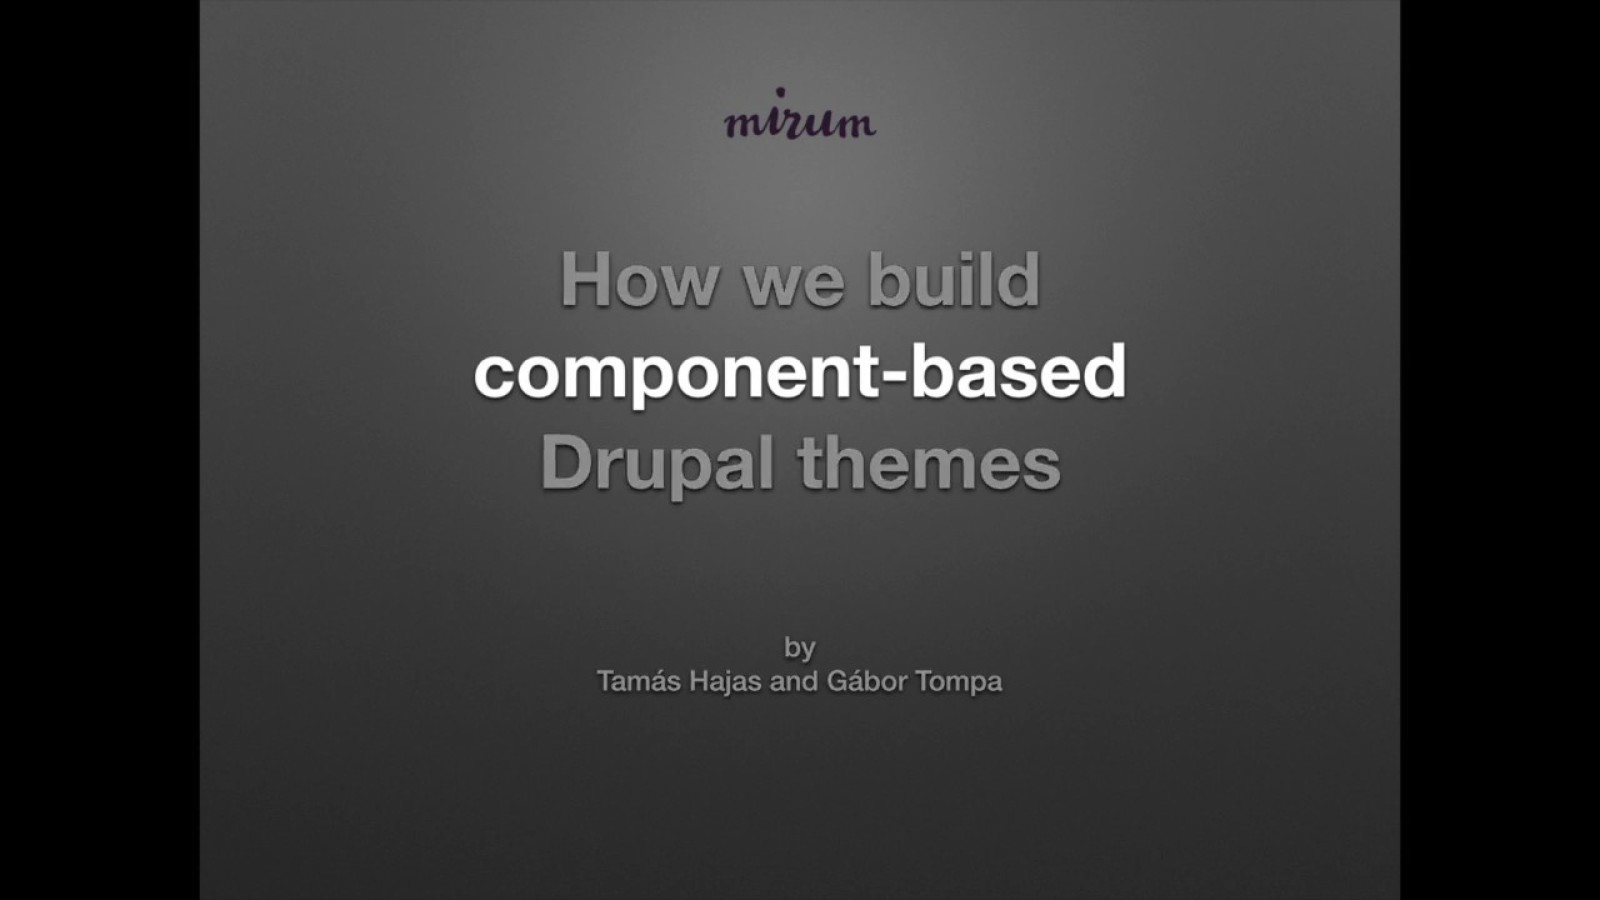 How we build component-based Drupal themes